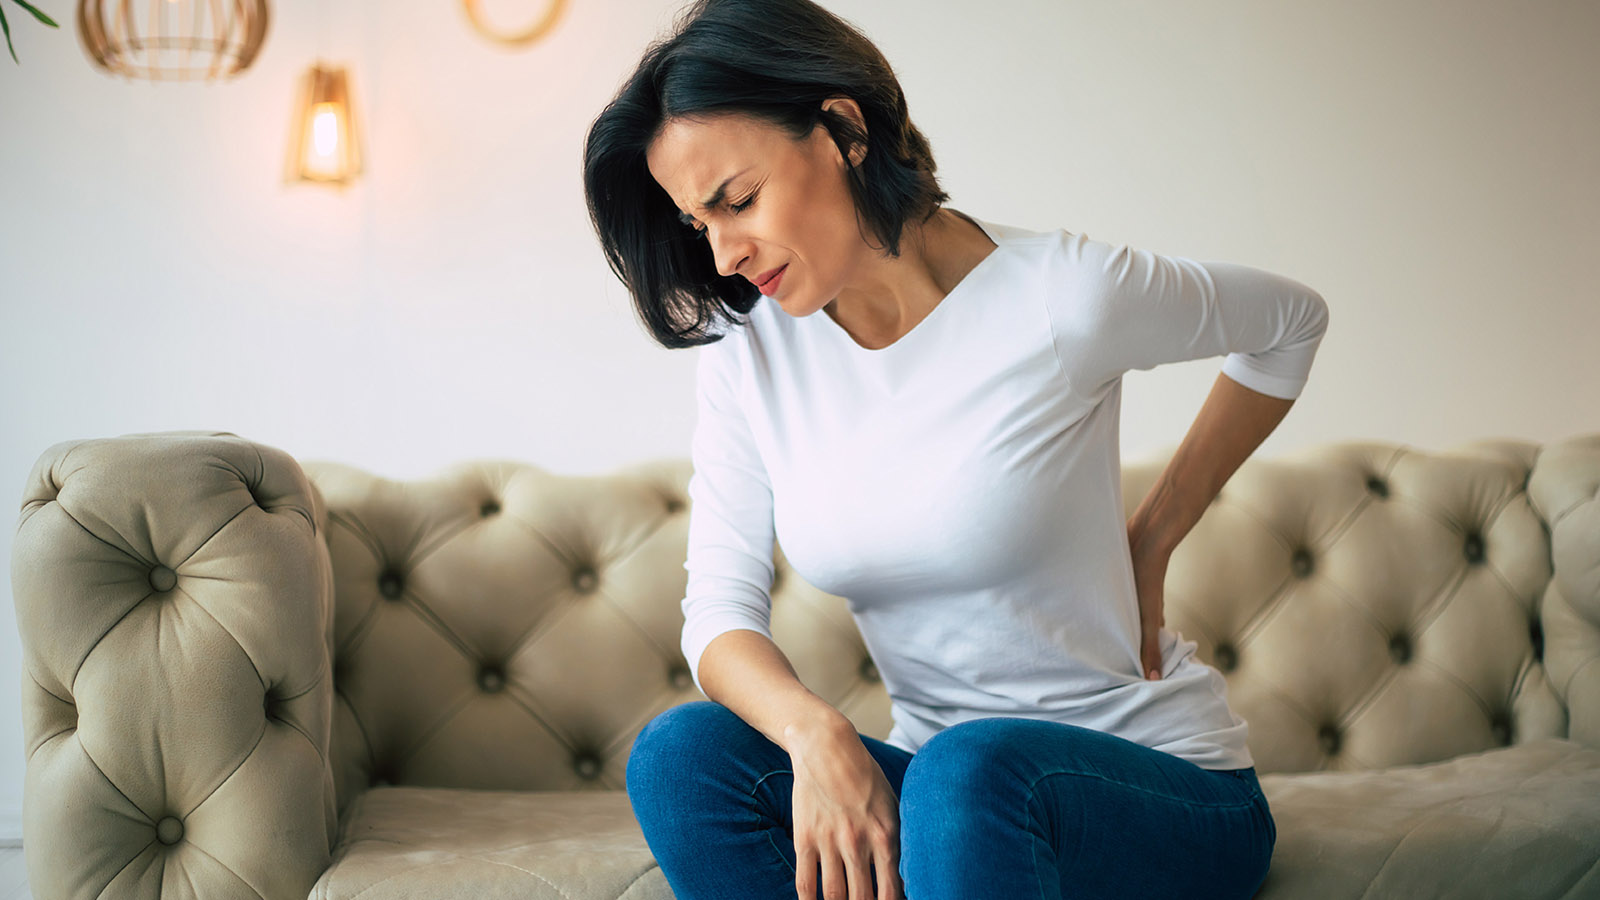 woman sitting on the couch holding her lower back in pain